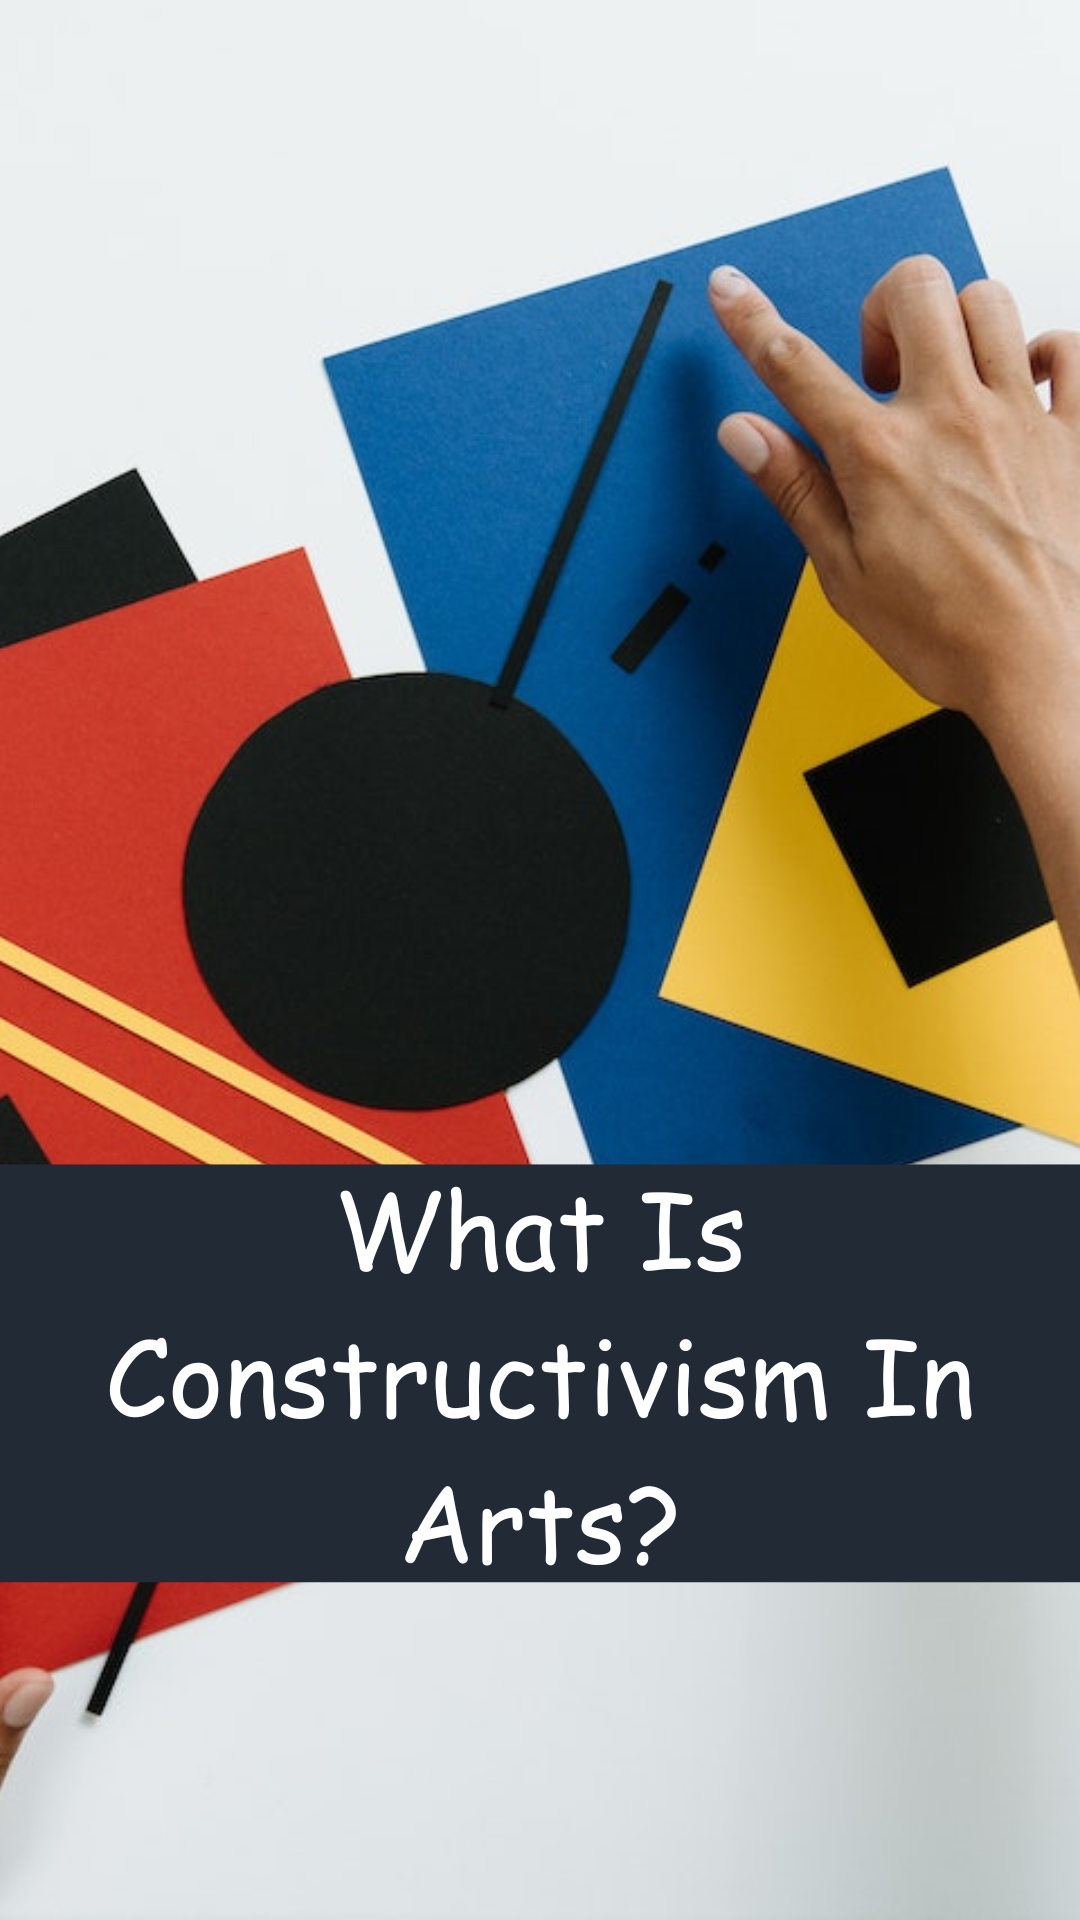 What Is Constructivism In Arts?